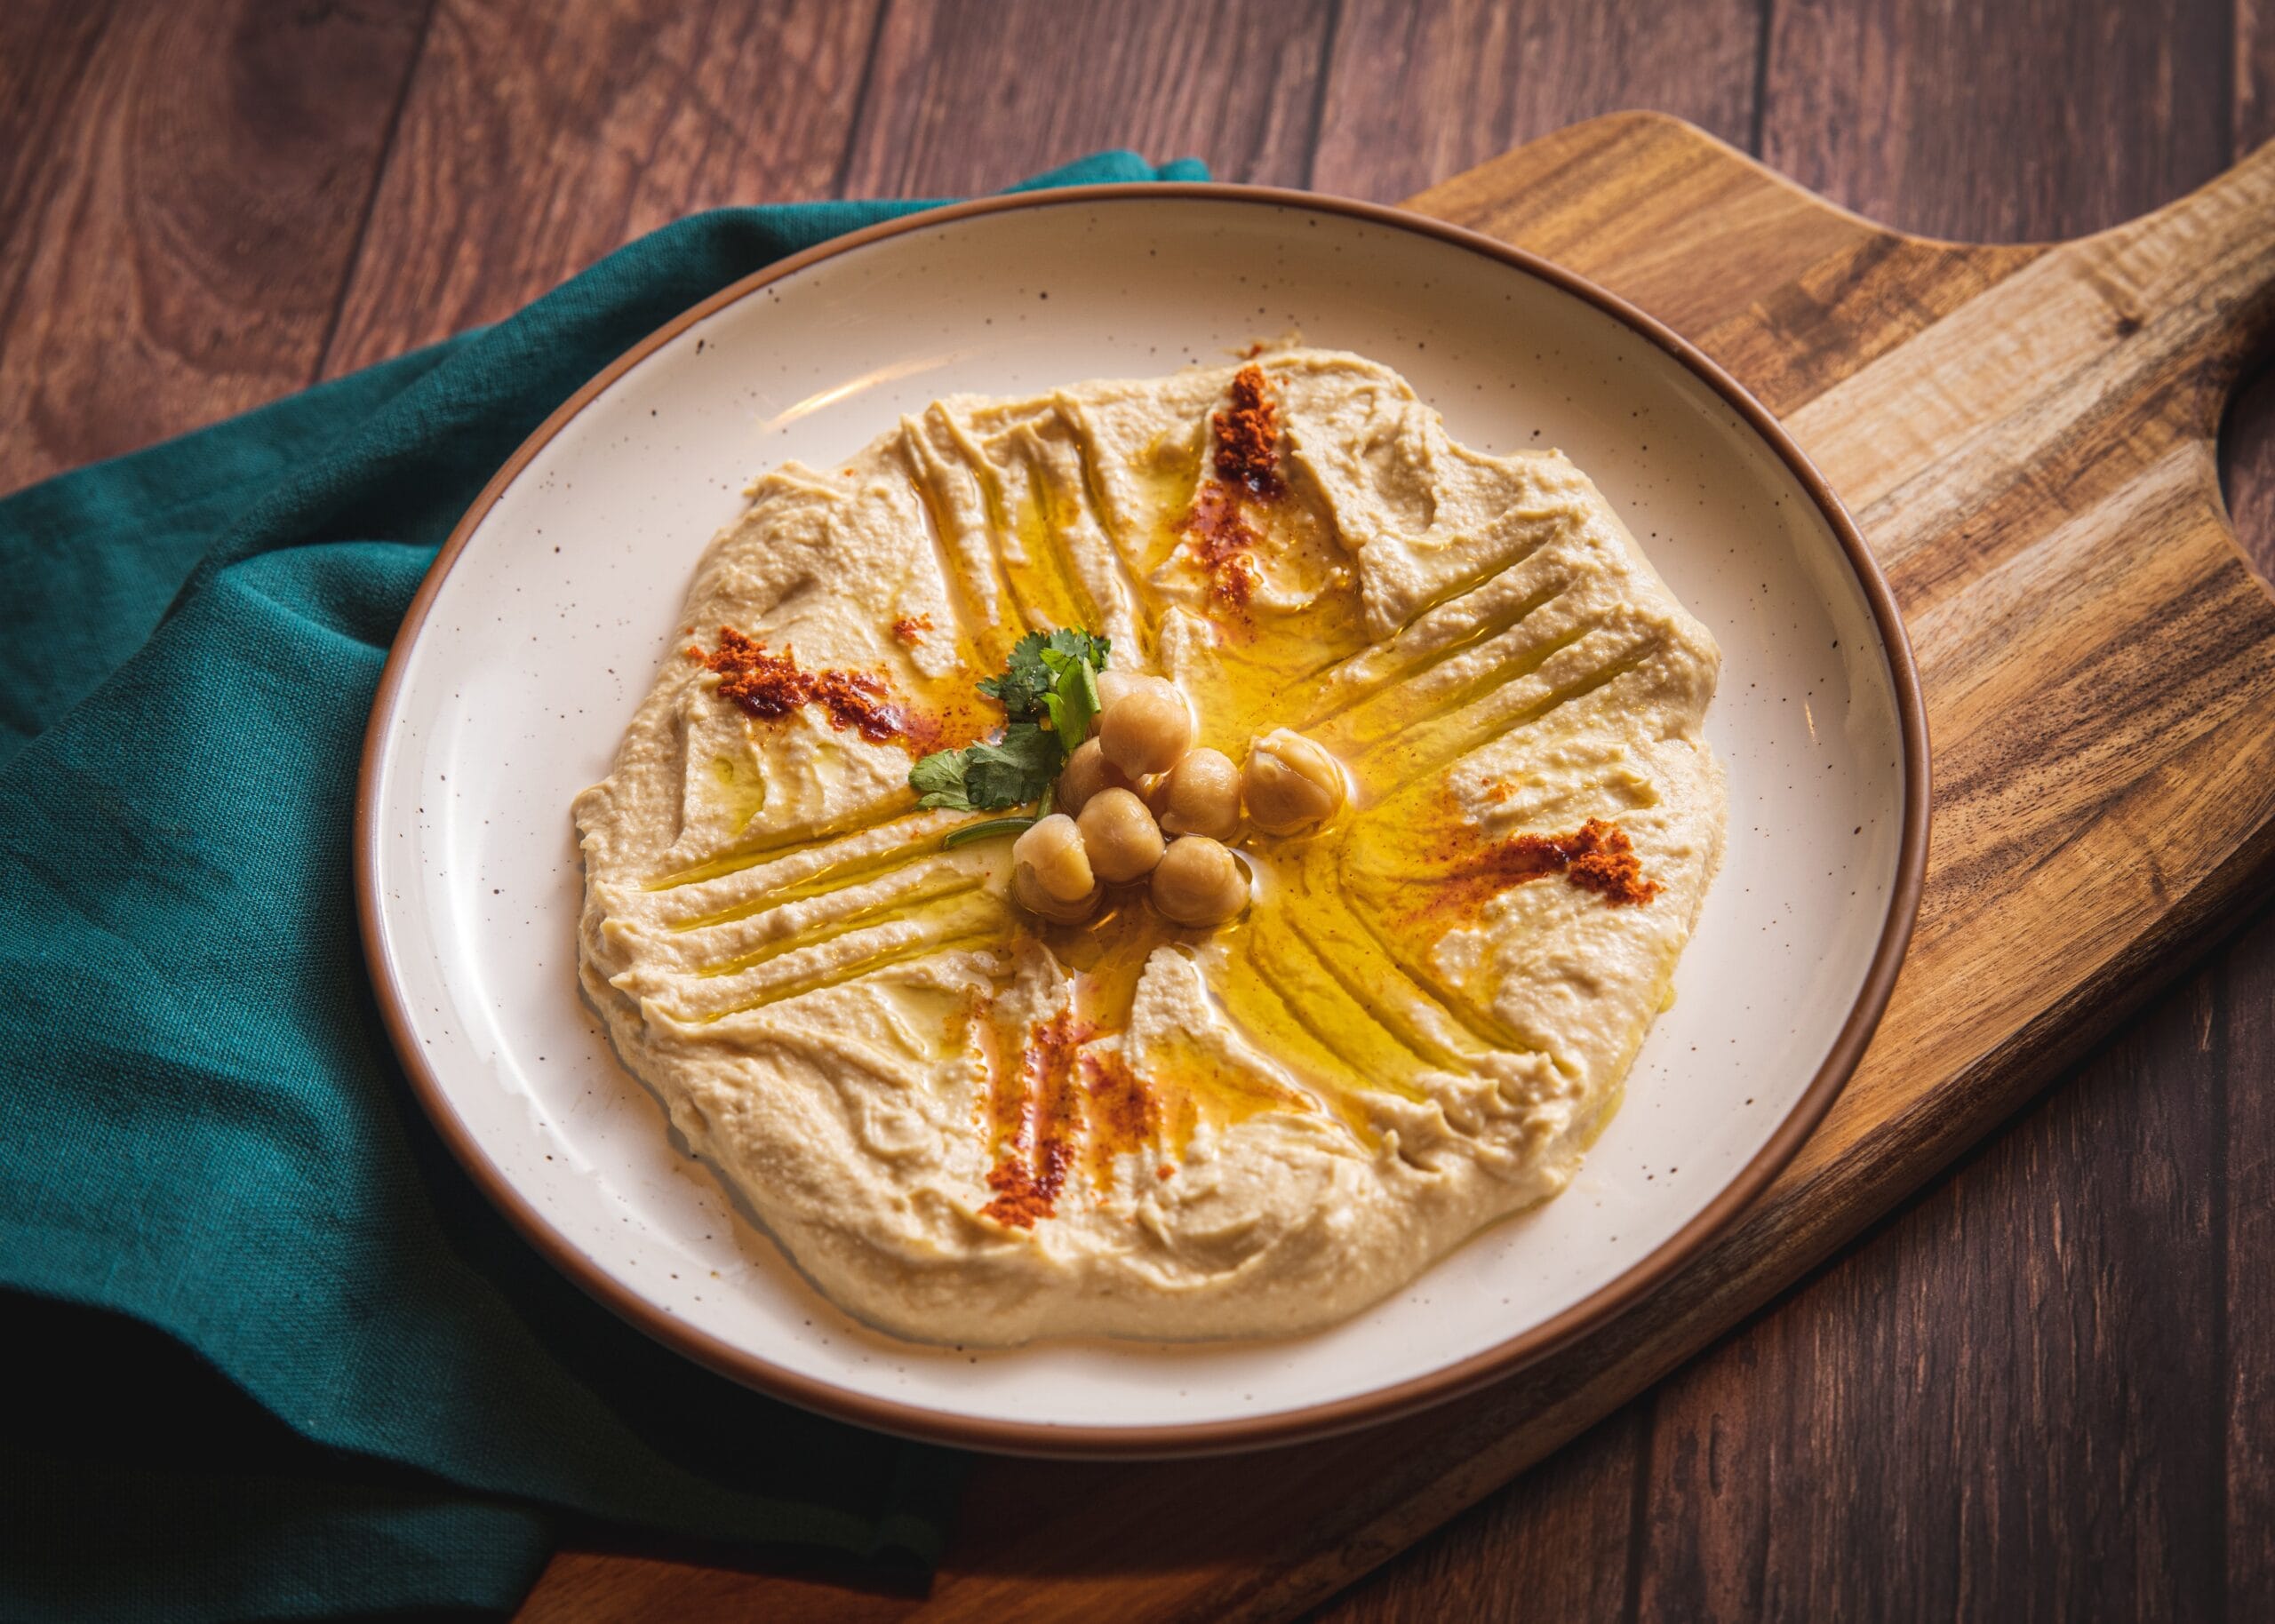 What is the main ingredient of Hummus?